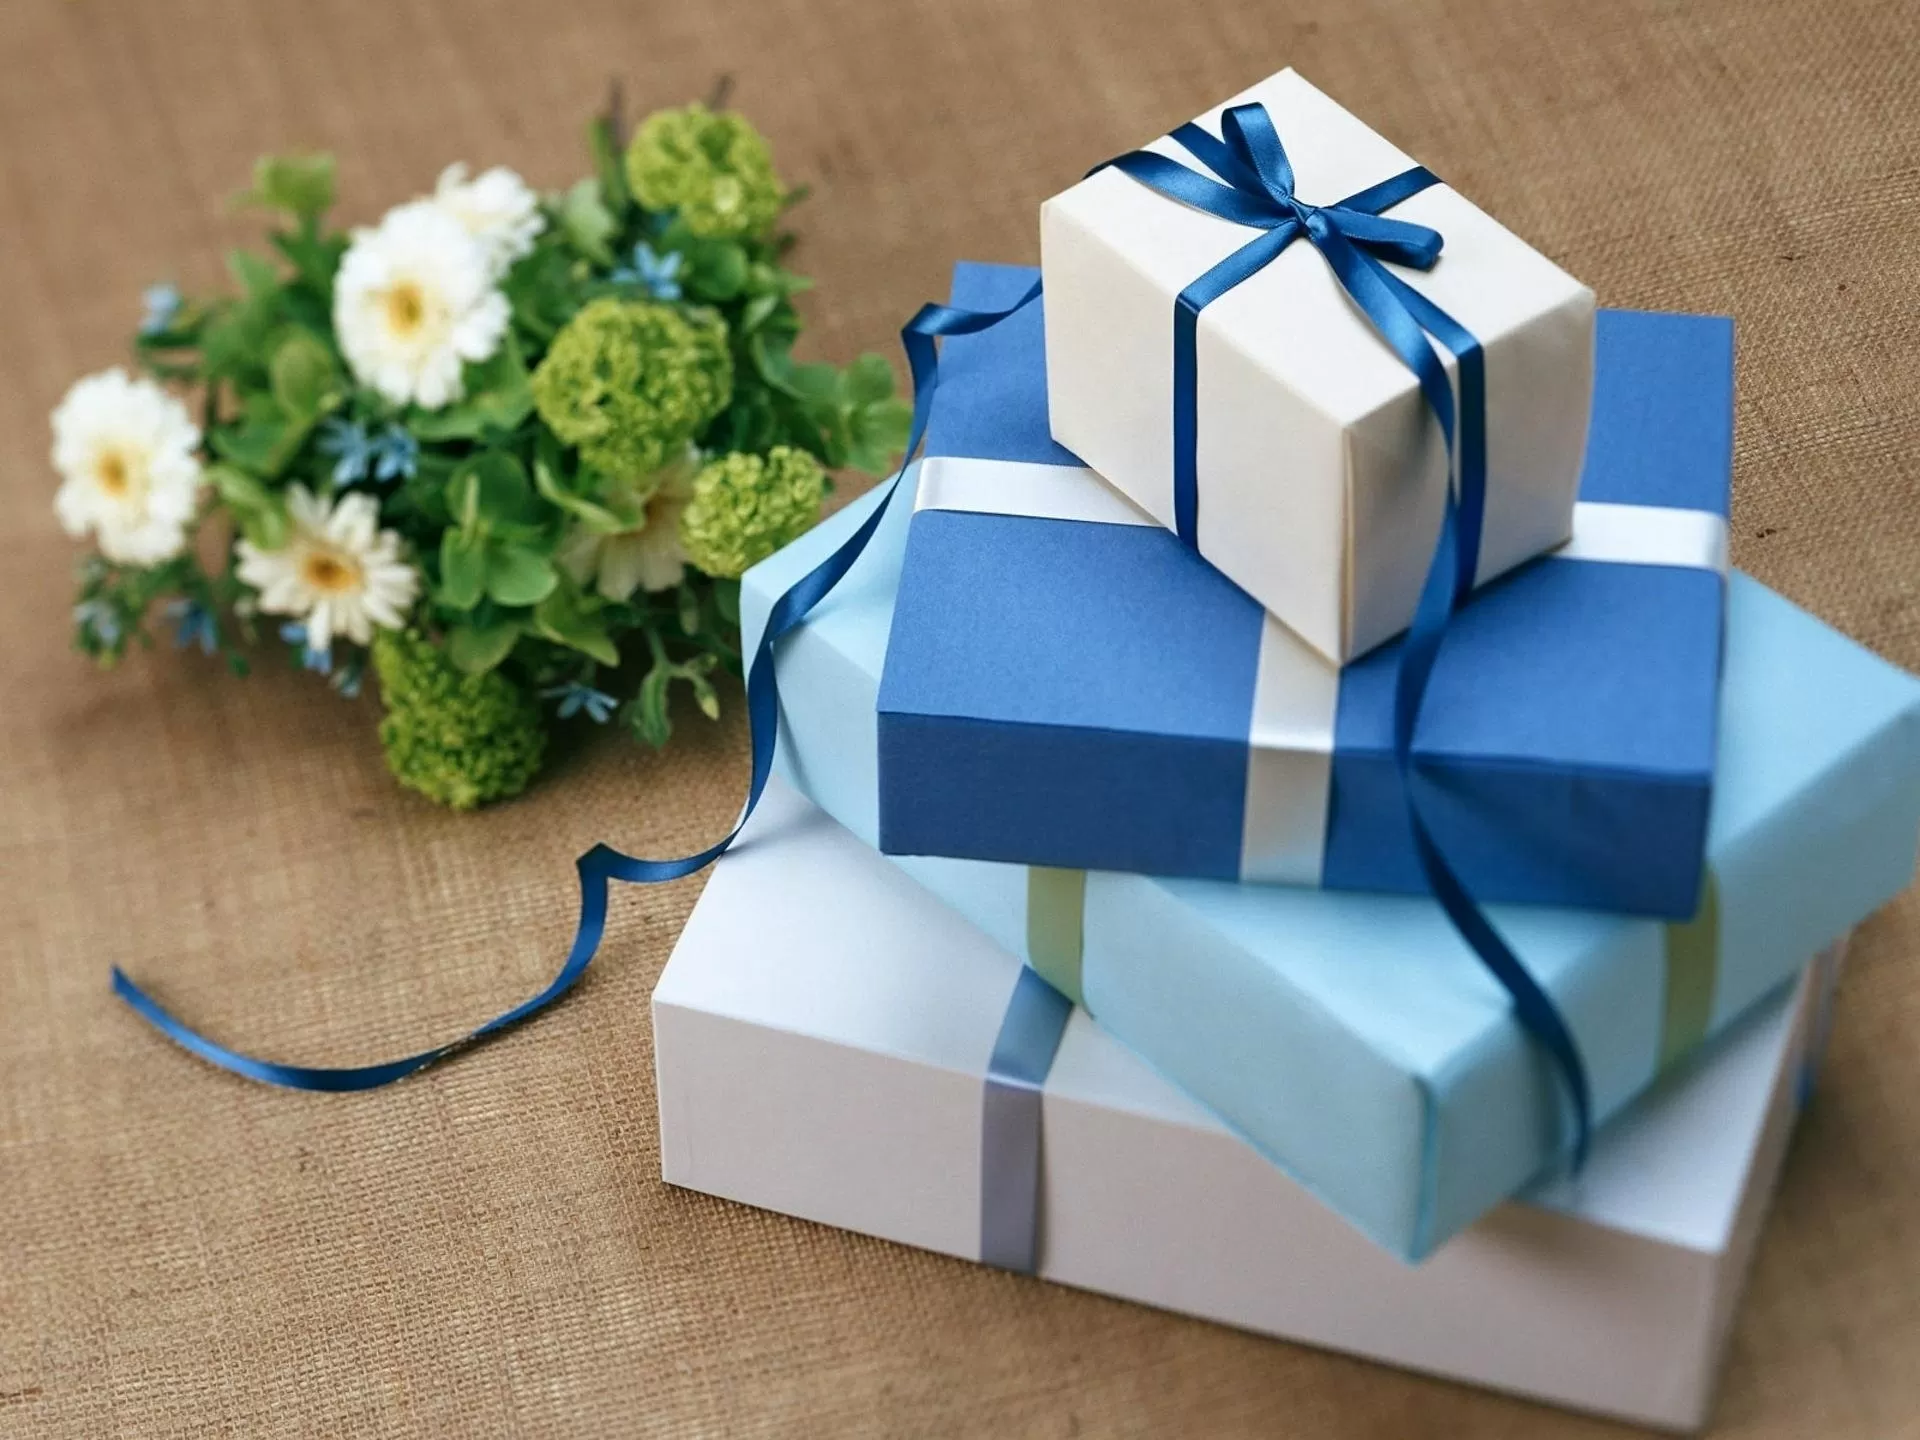 Ribbon tied box is the perfect present for everyone.